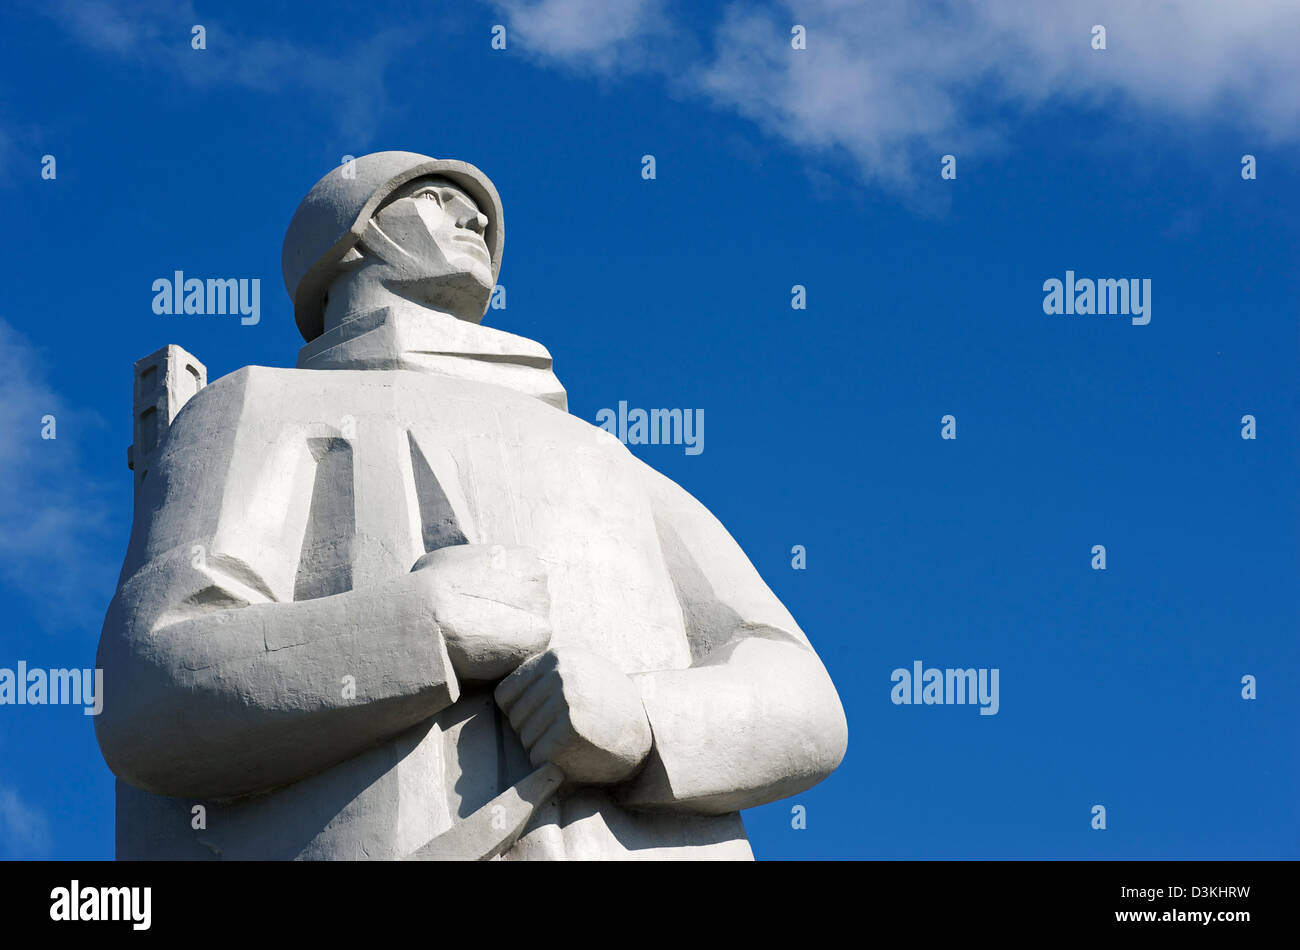 The Alyosha war memorial towers above the city of Murmansk in Northern Russia Stock Photo